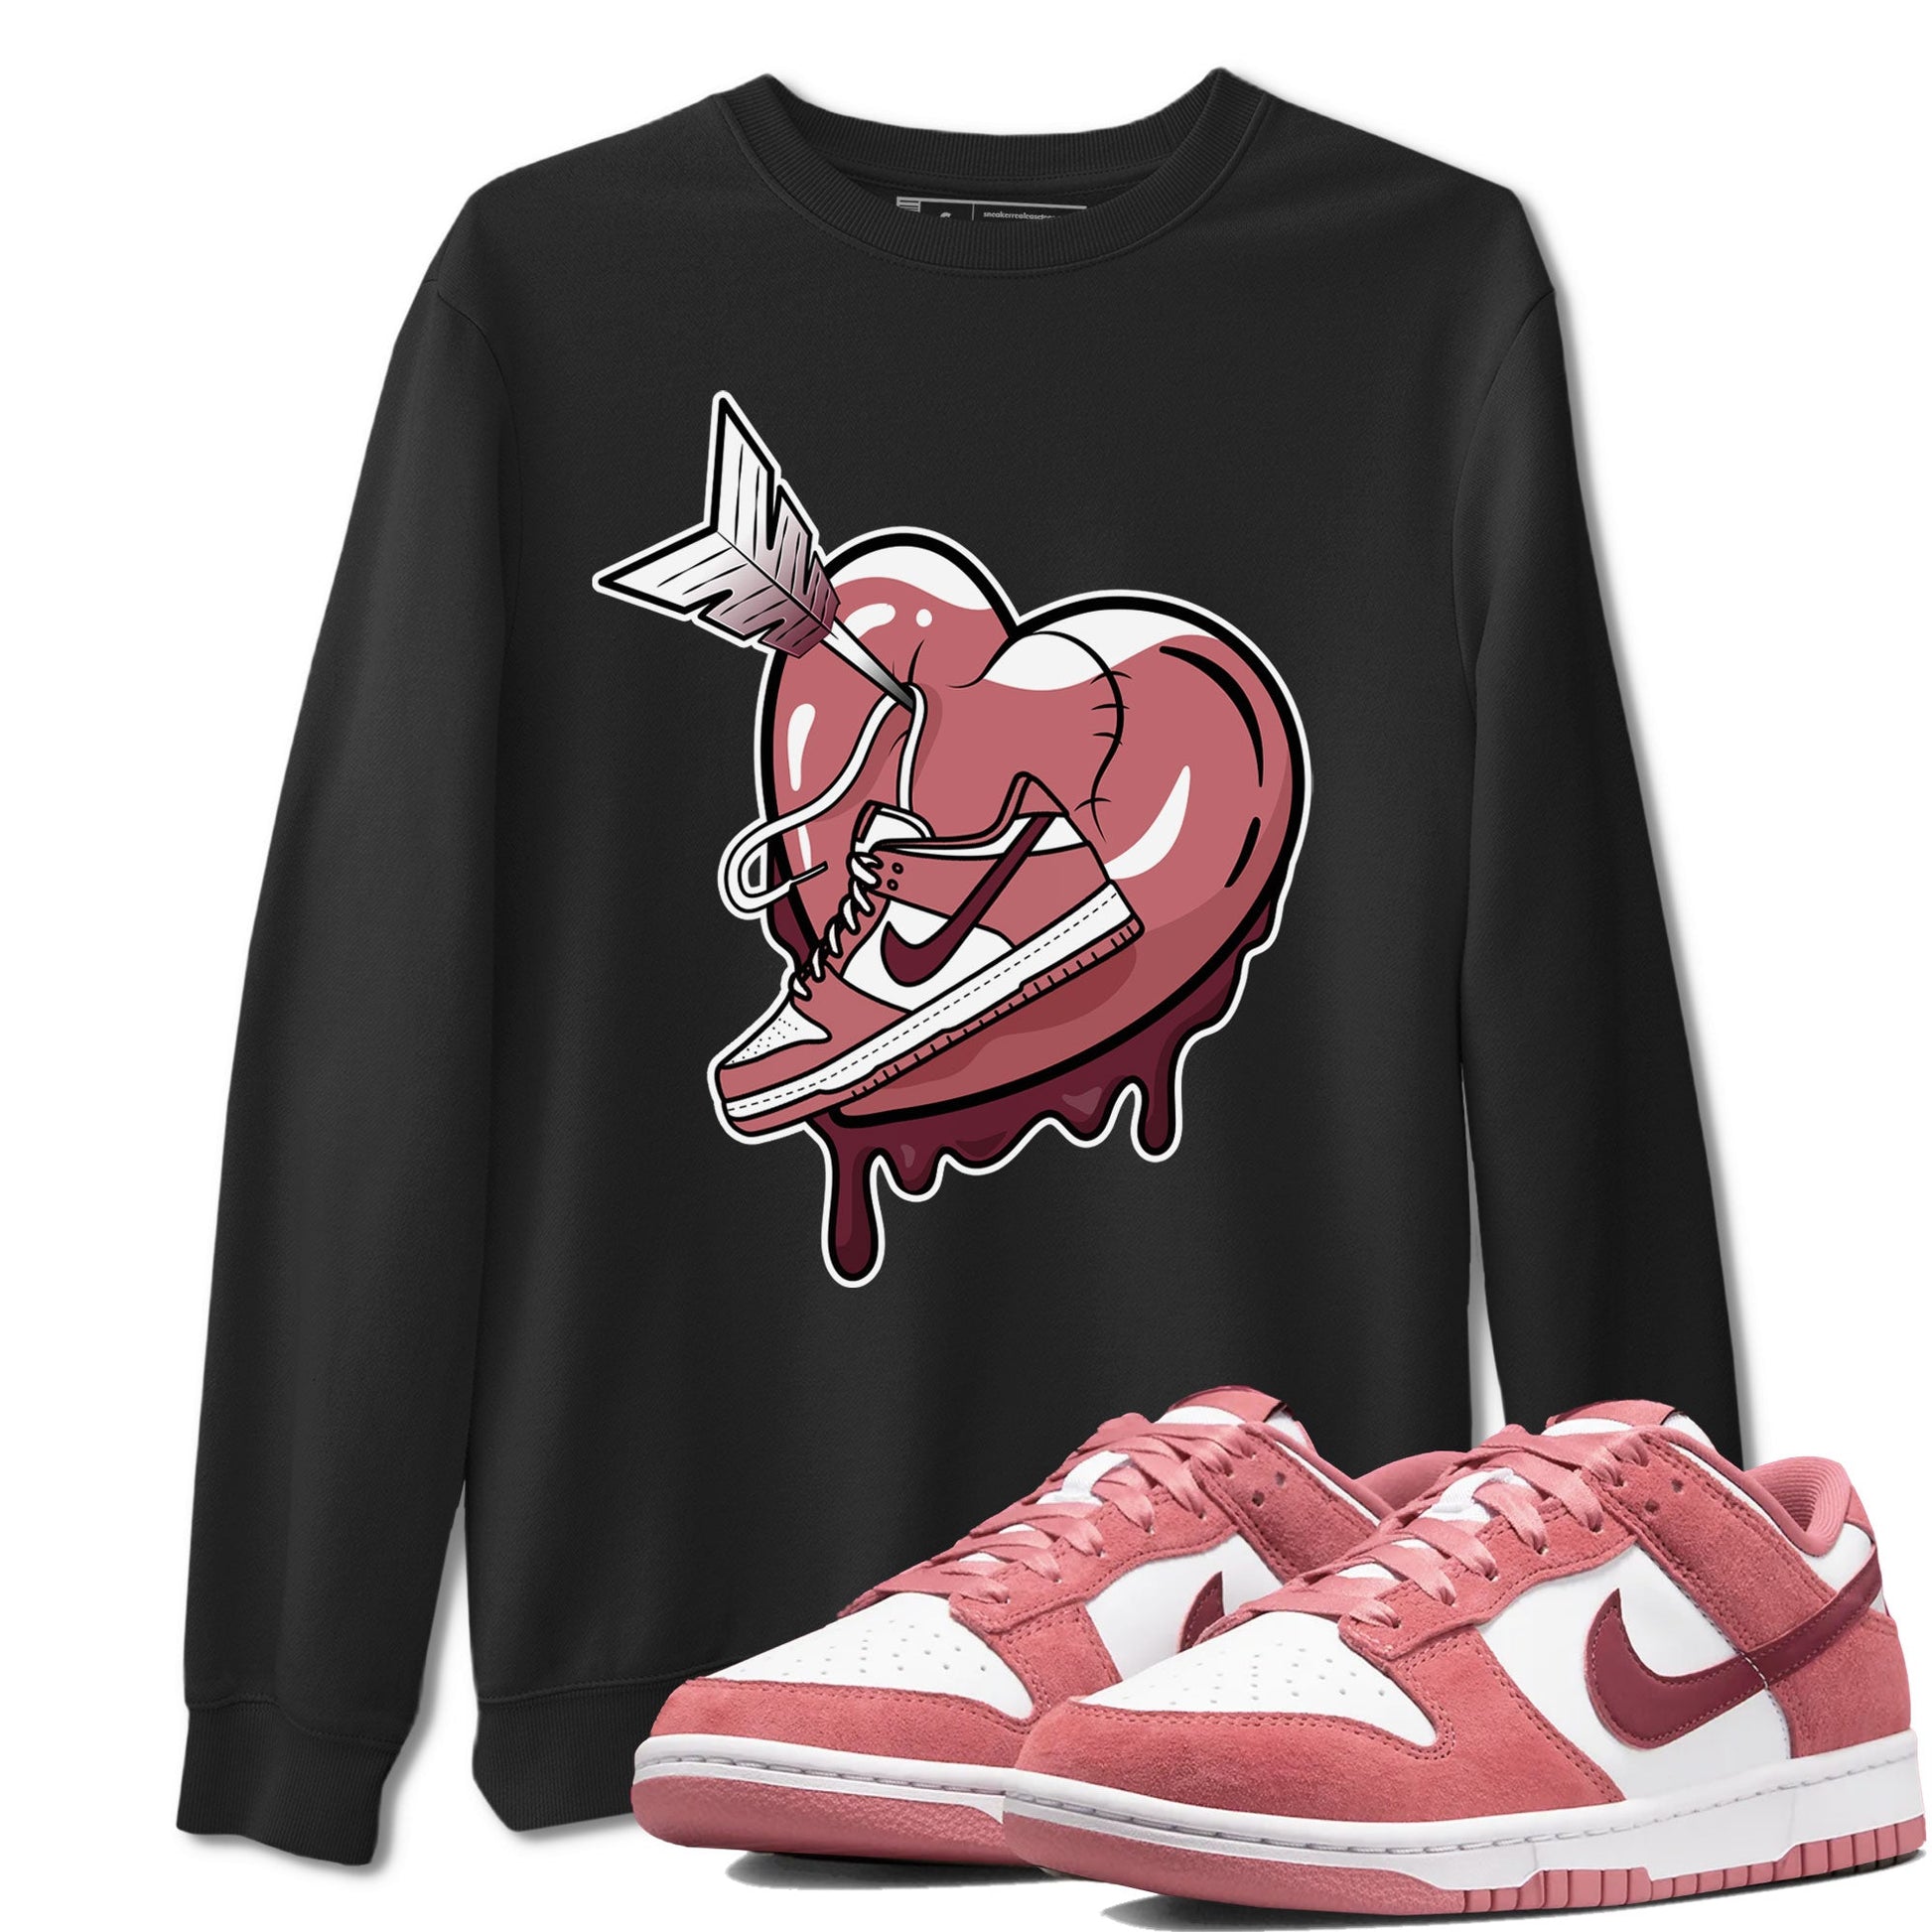 Dunk Valentines Day shirt to match jordans Mad In Love sneaker tees Dunk Low Valentine's Day SNRT Sneaker Release Tees Cotton Sneaker Tee Black 1 T-Shirt